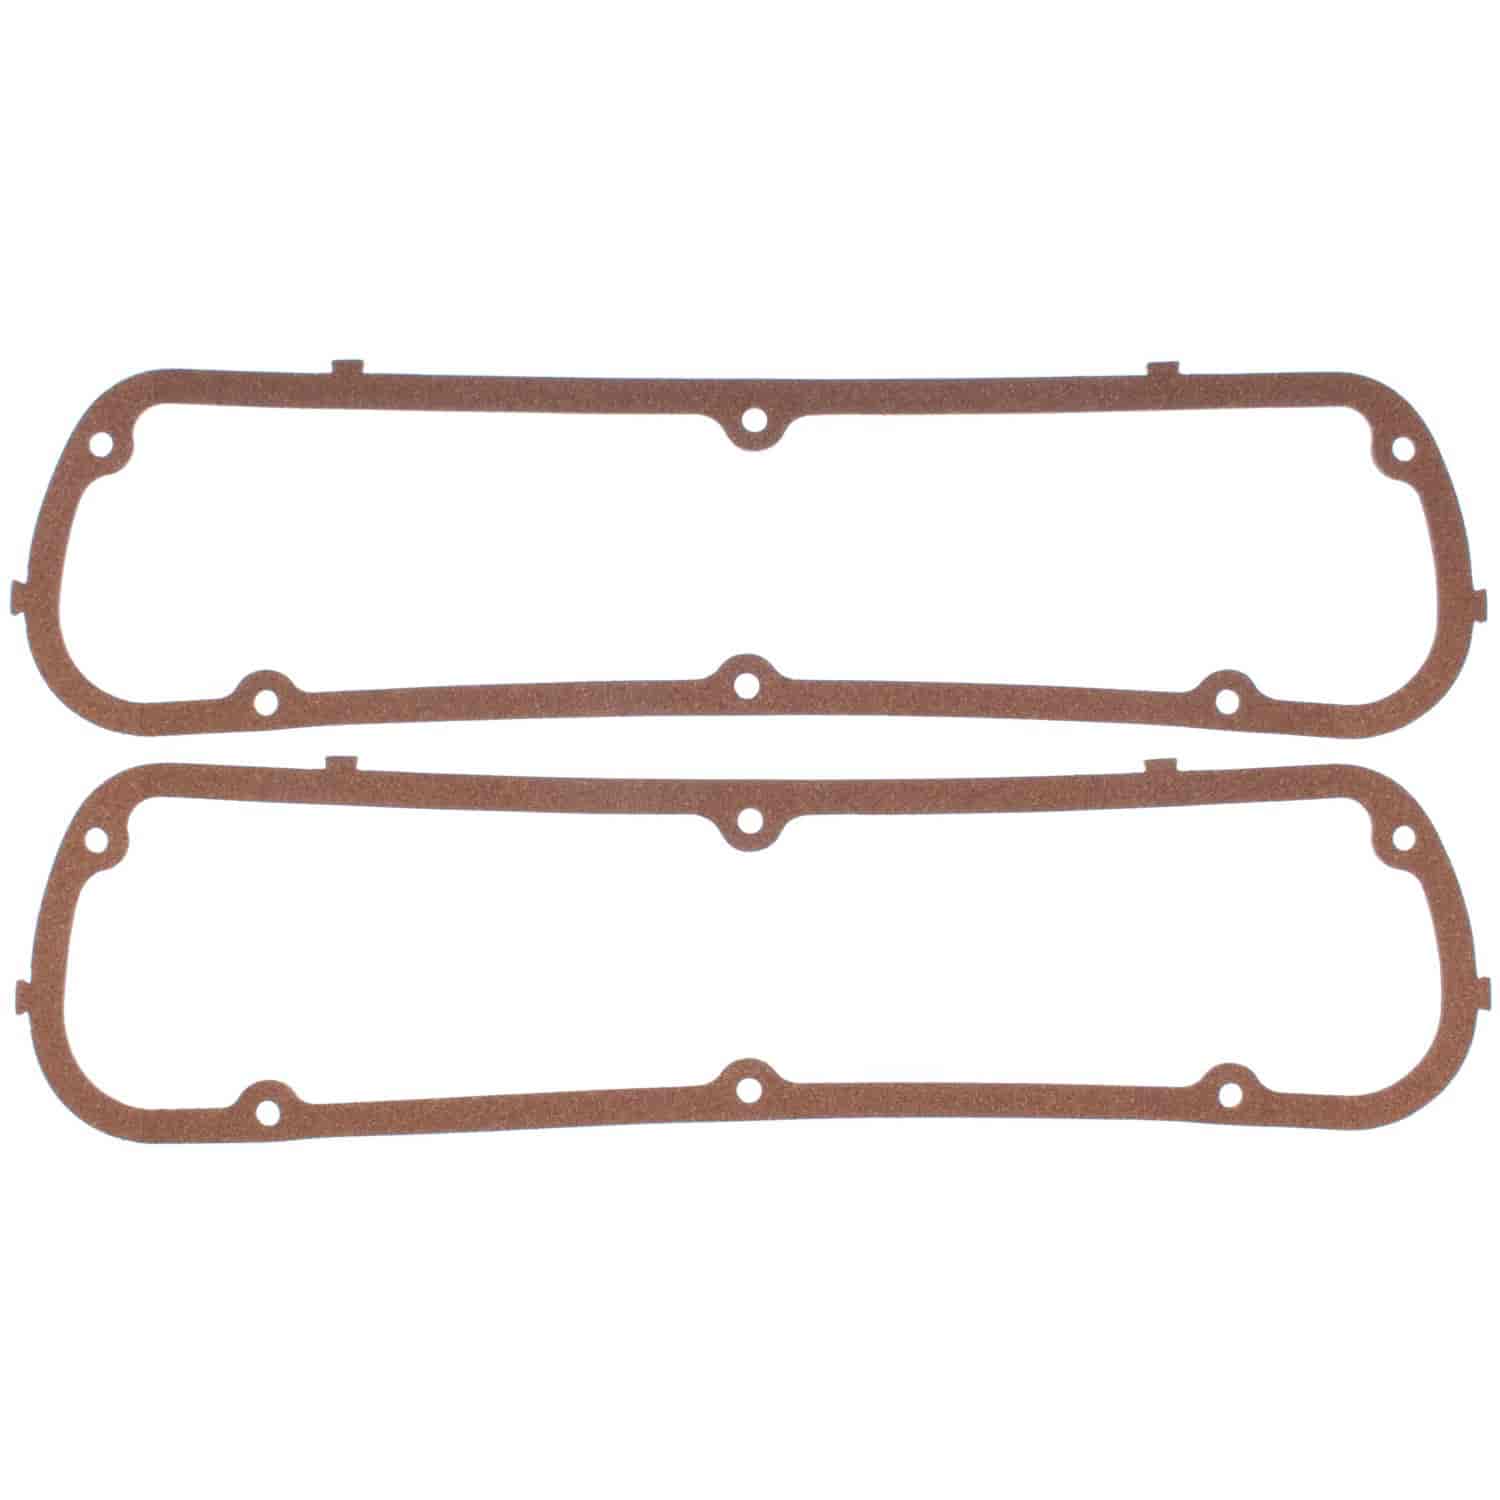 Performance Valve Cover Gasket Set 1962-2001 Small Block Ford V8 221/255/260/289/302/351W